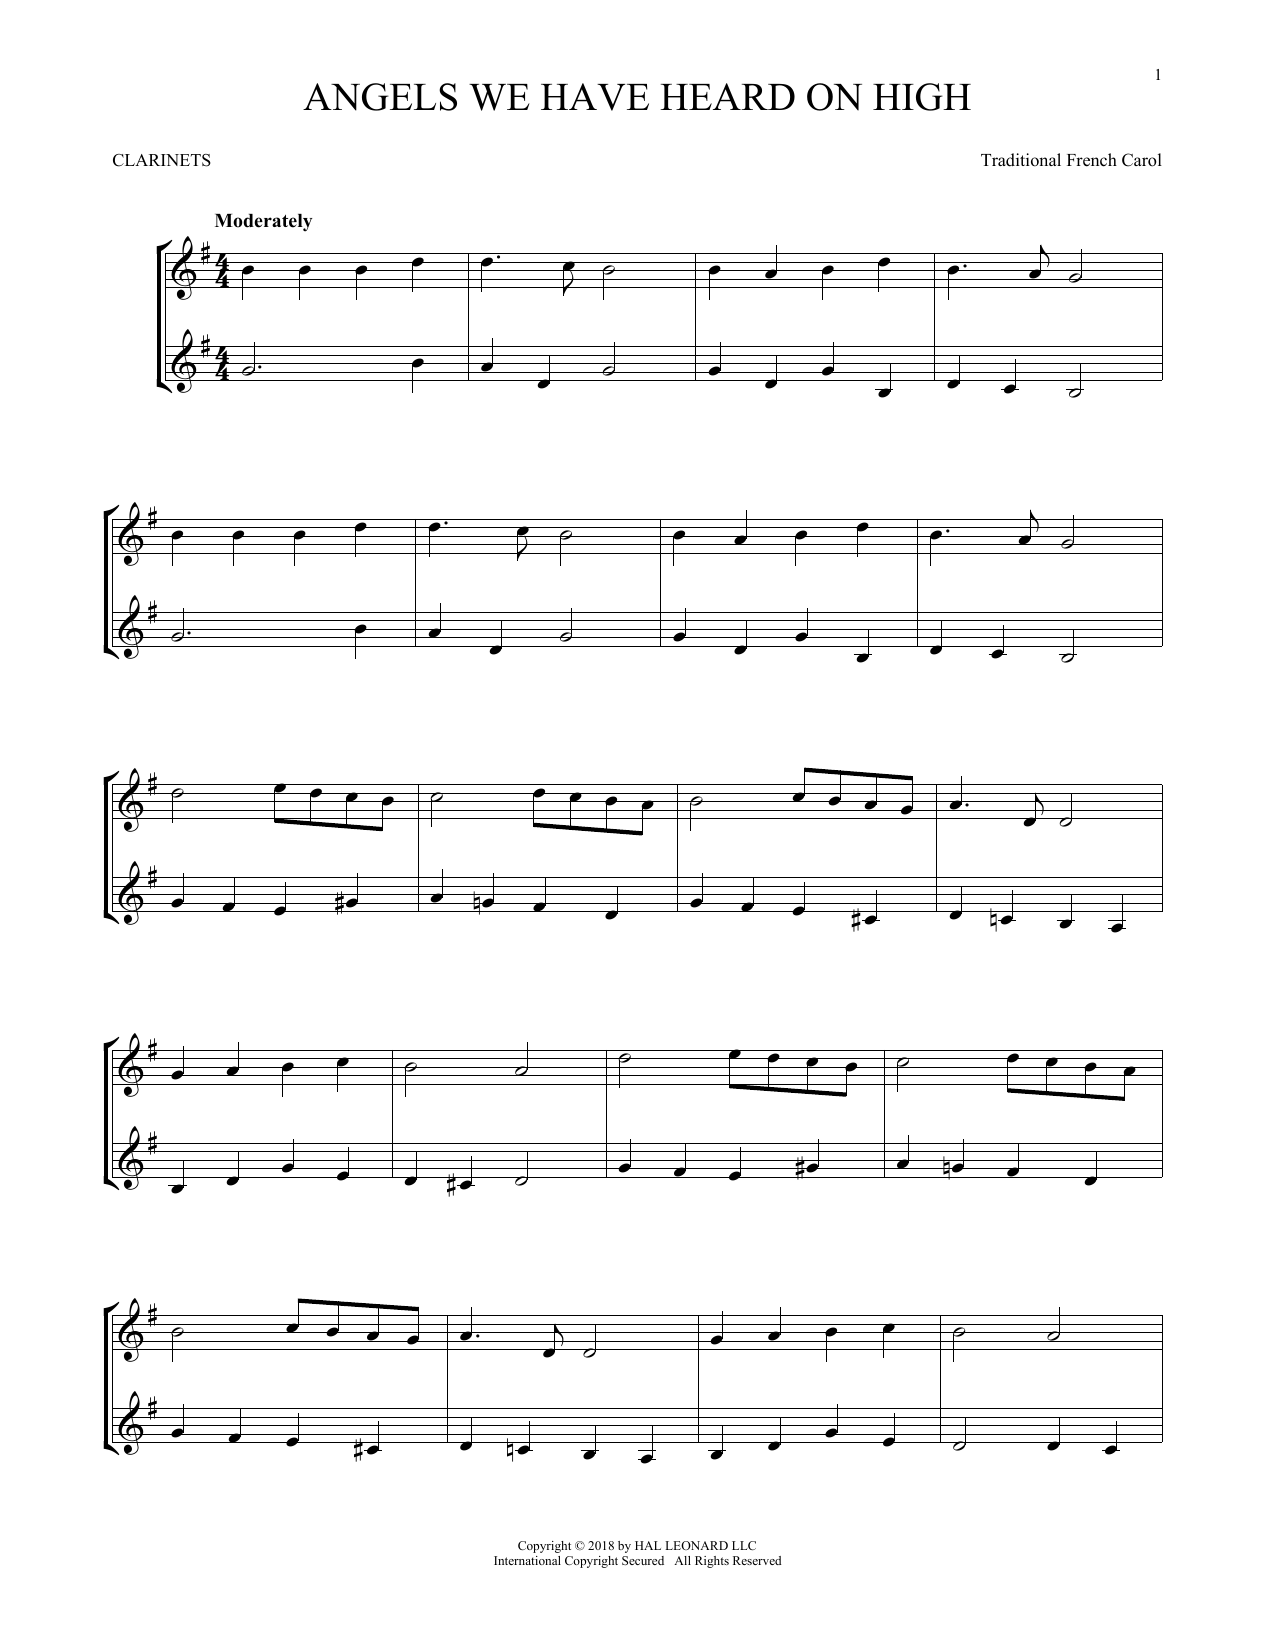 Download James Chadwick Angels We Have Heard On High Sheet Music